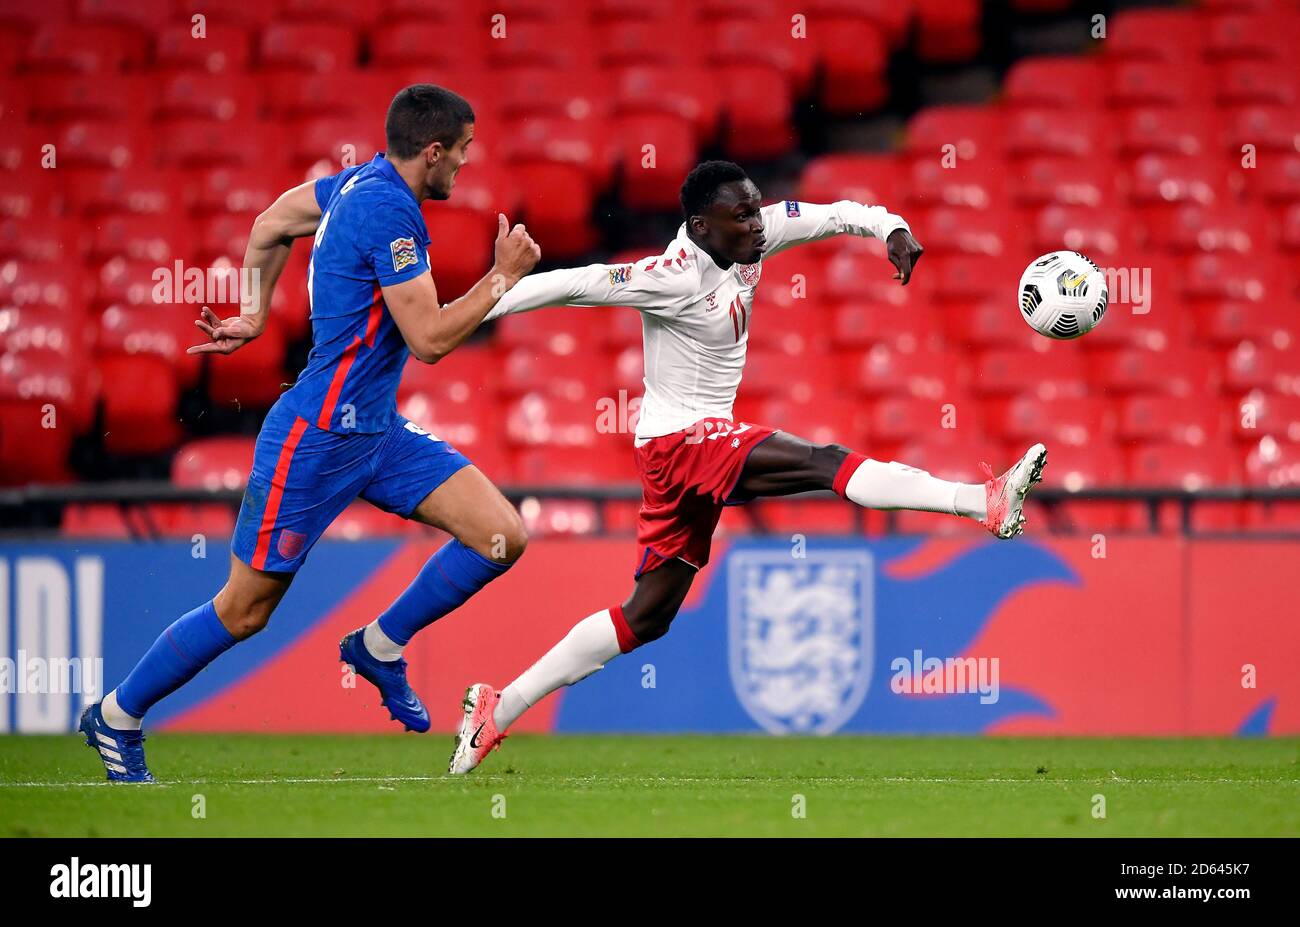 England's Conor Coady (left) and Denmark’s Pione Sisto during the UEFA Nations League Group 2, League A match at Wembley Stadium, London. Stock Photo